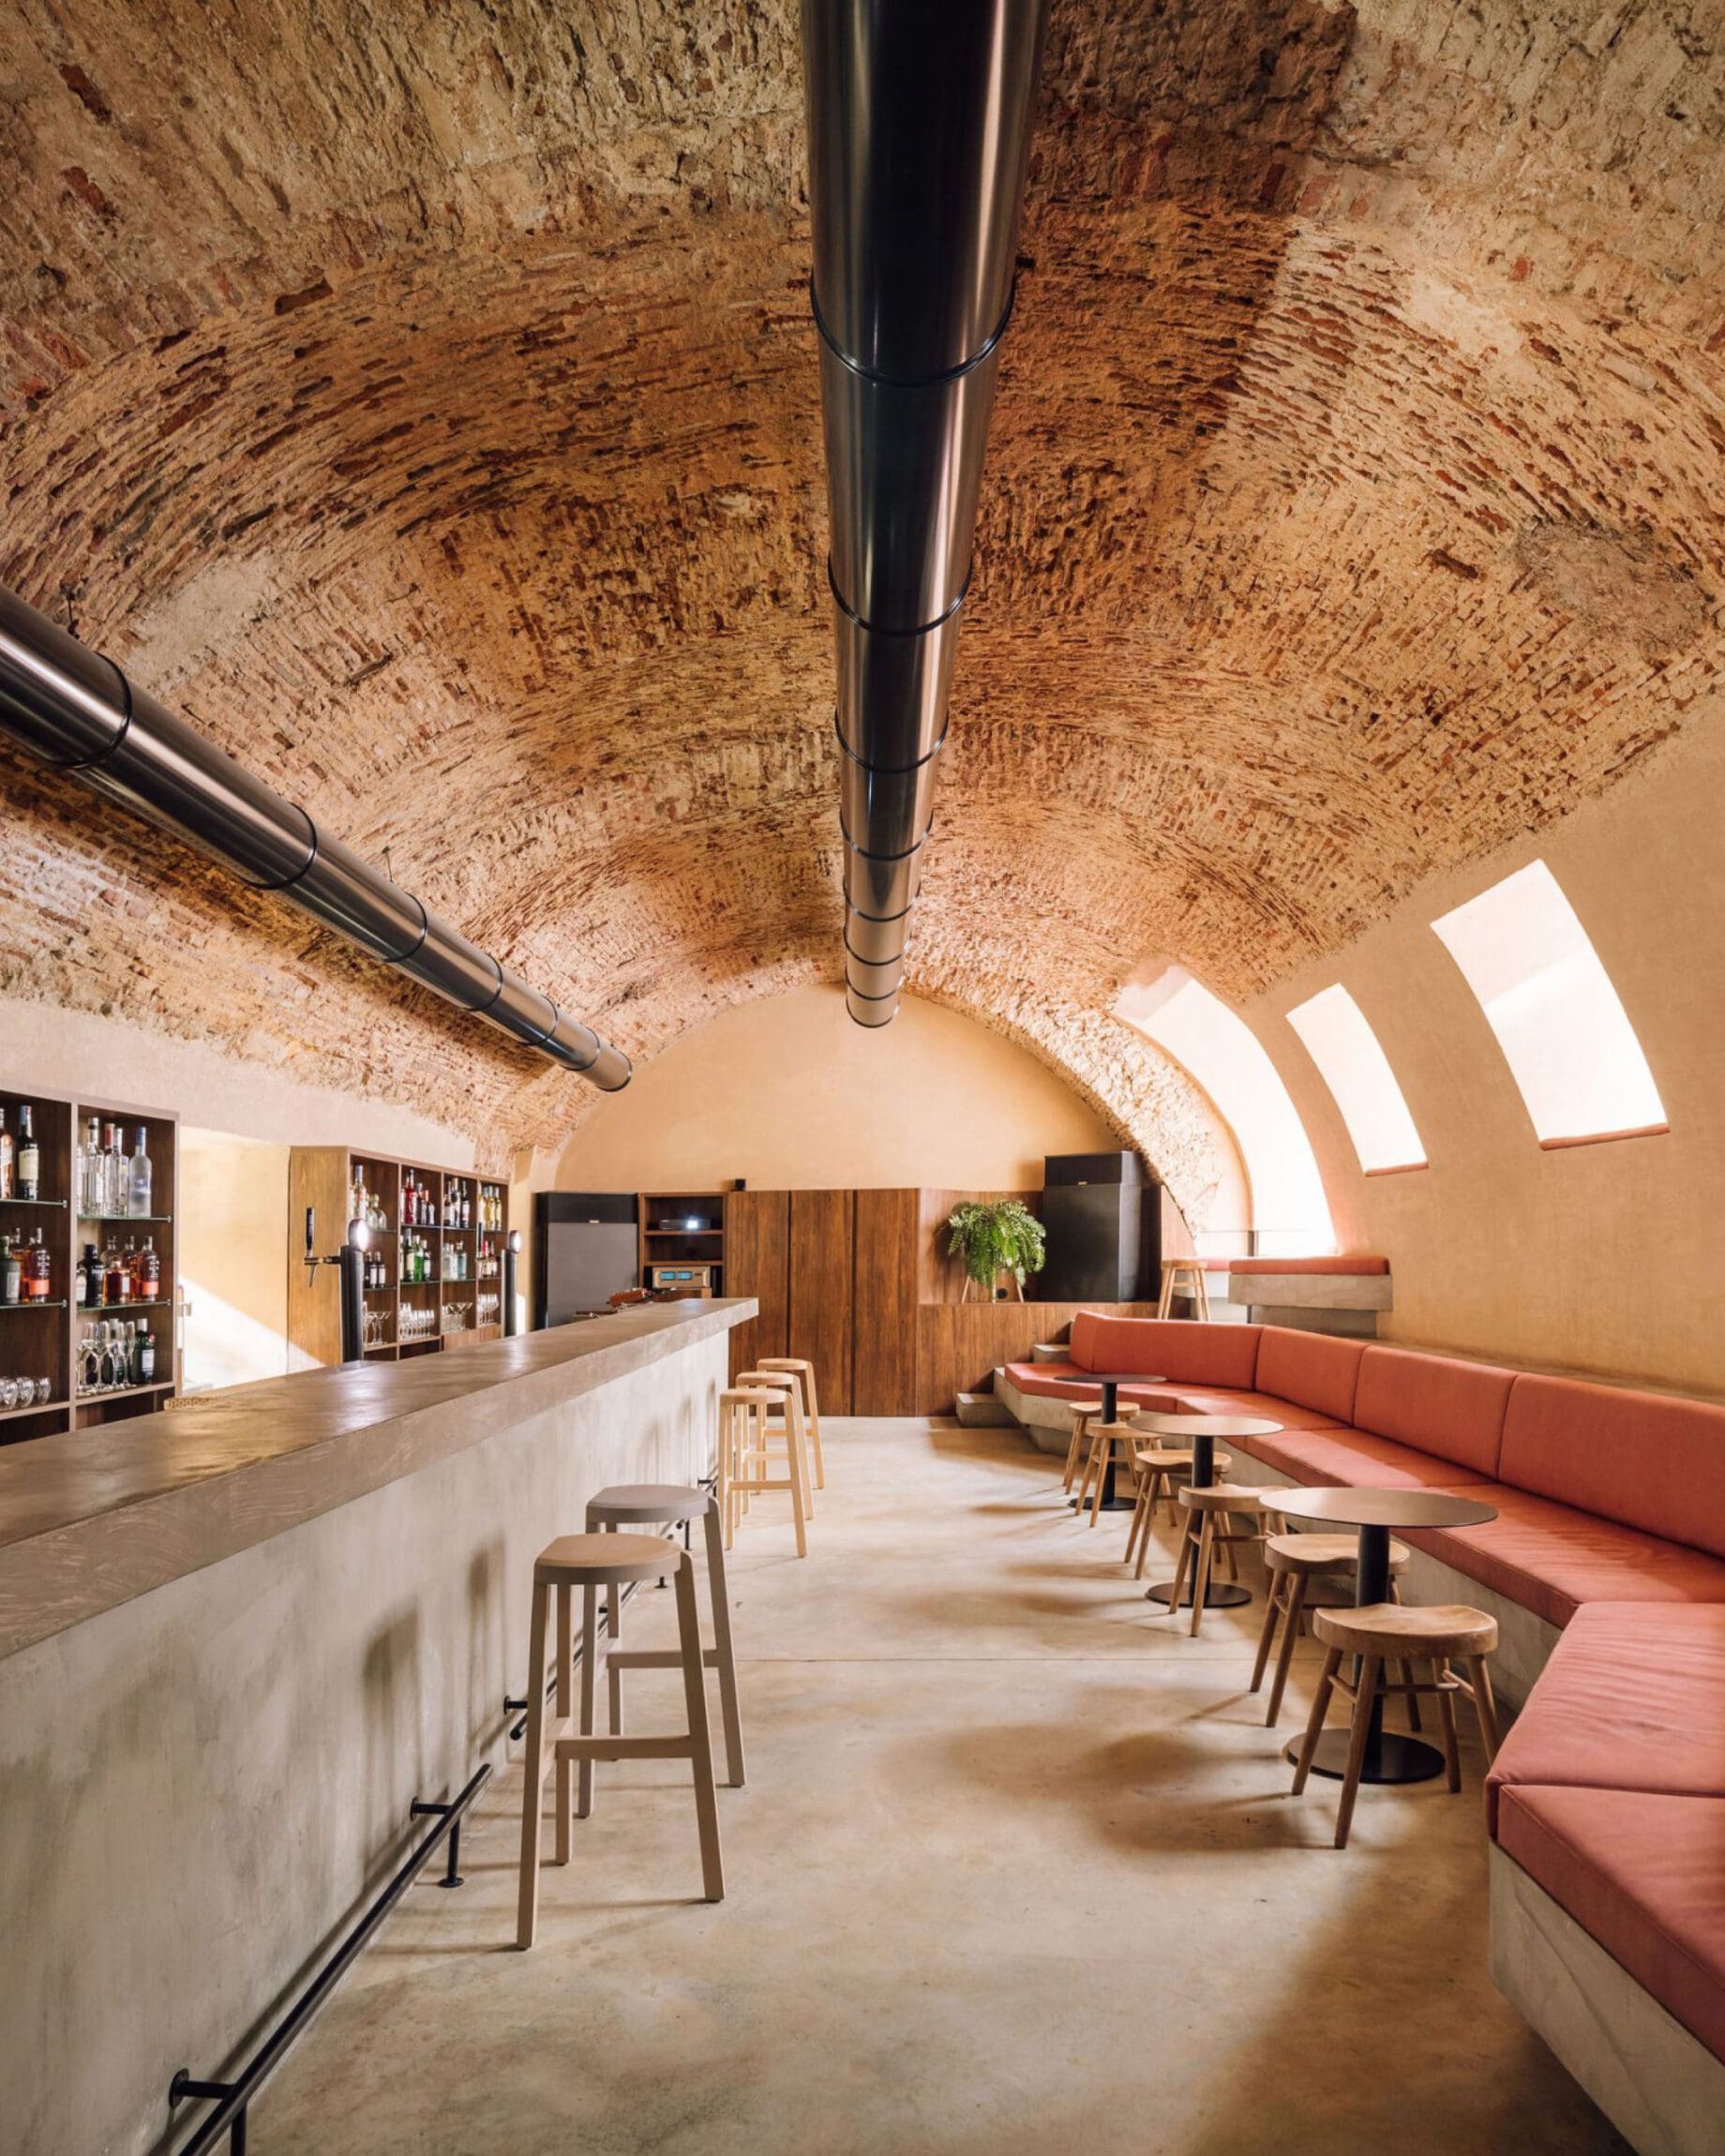 The best bars in Lisbon | The vaulted ceiling at Vago